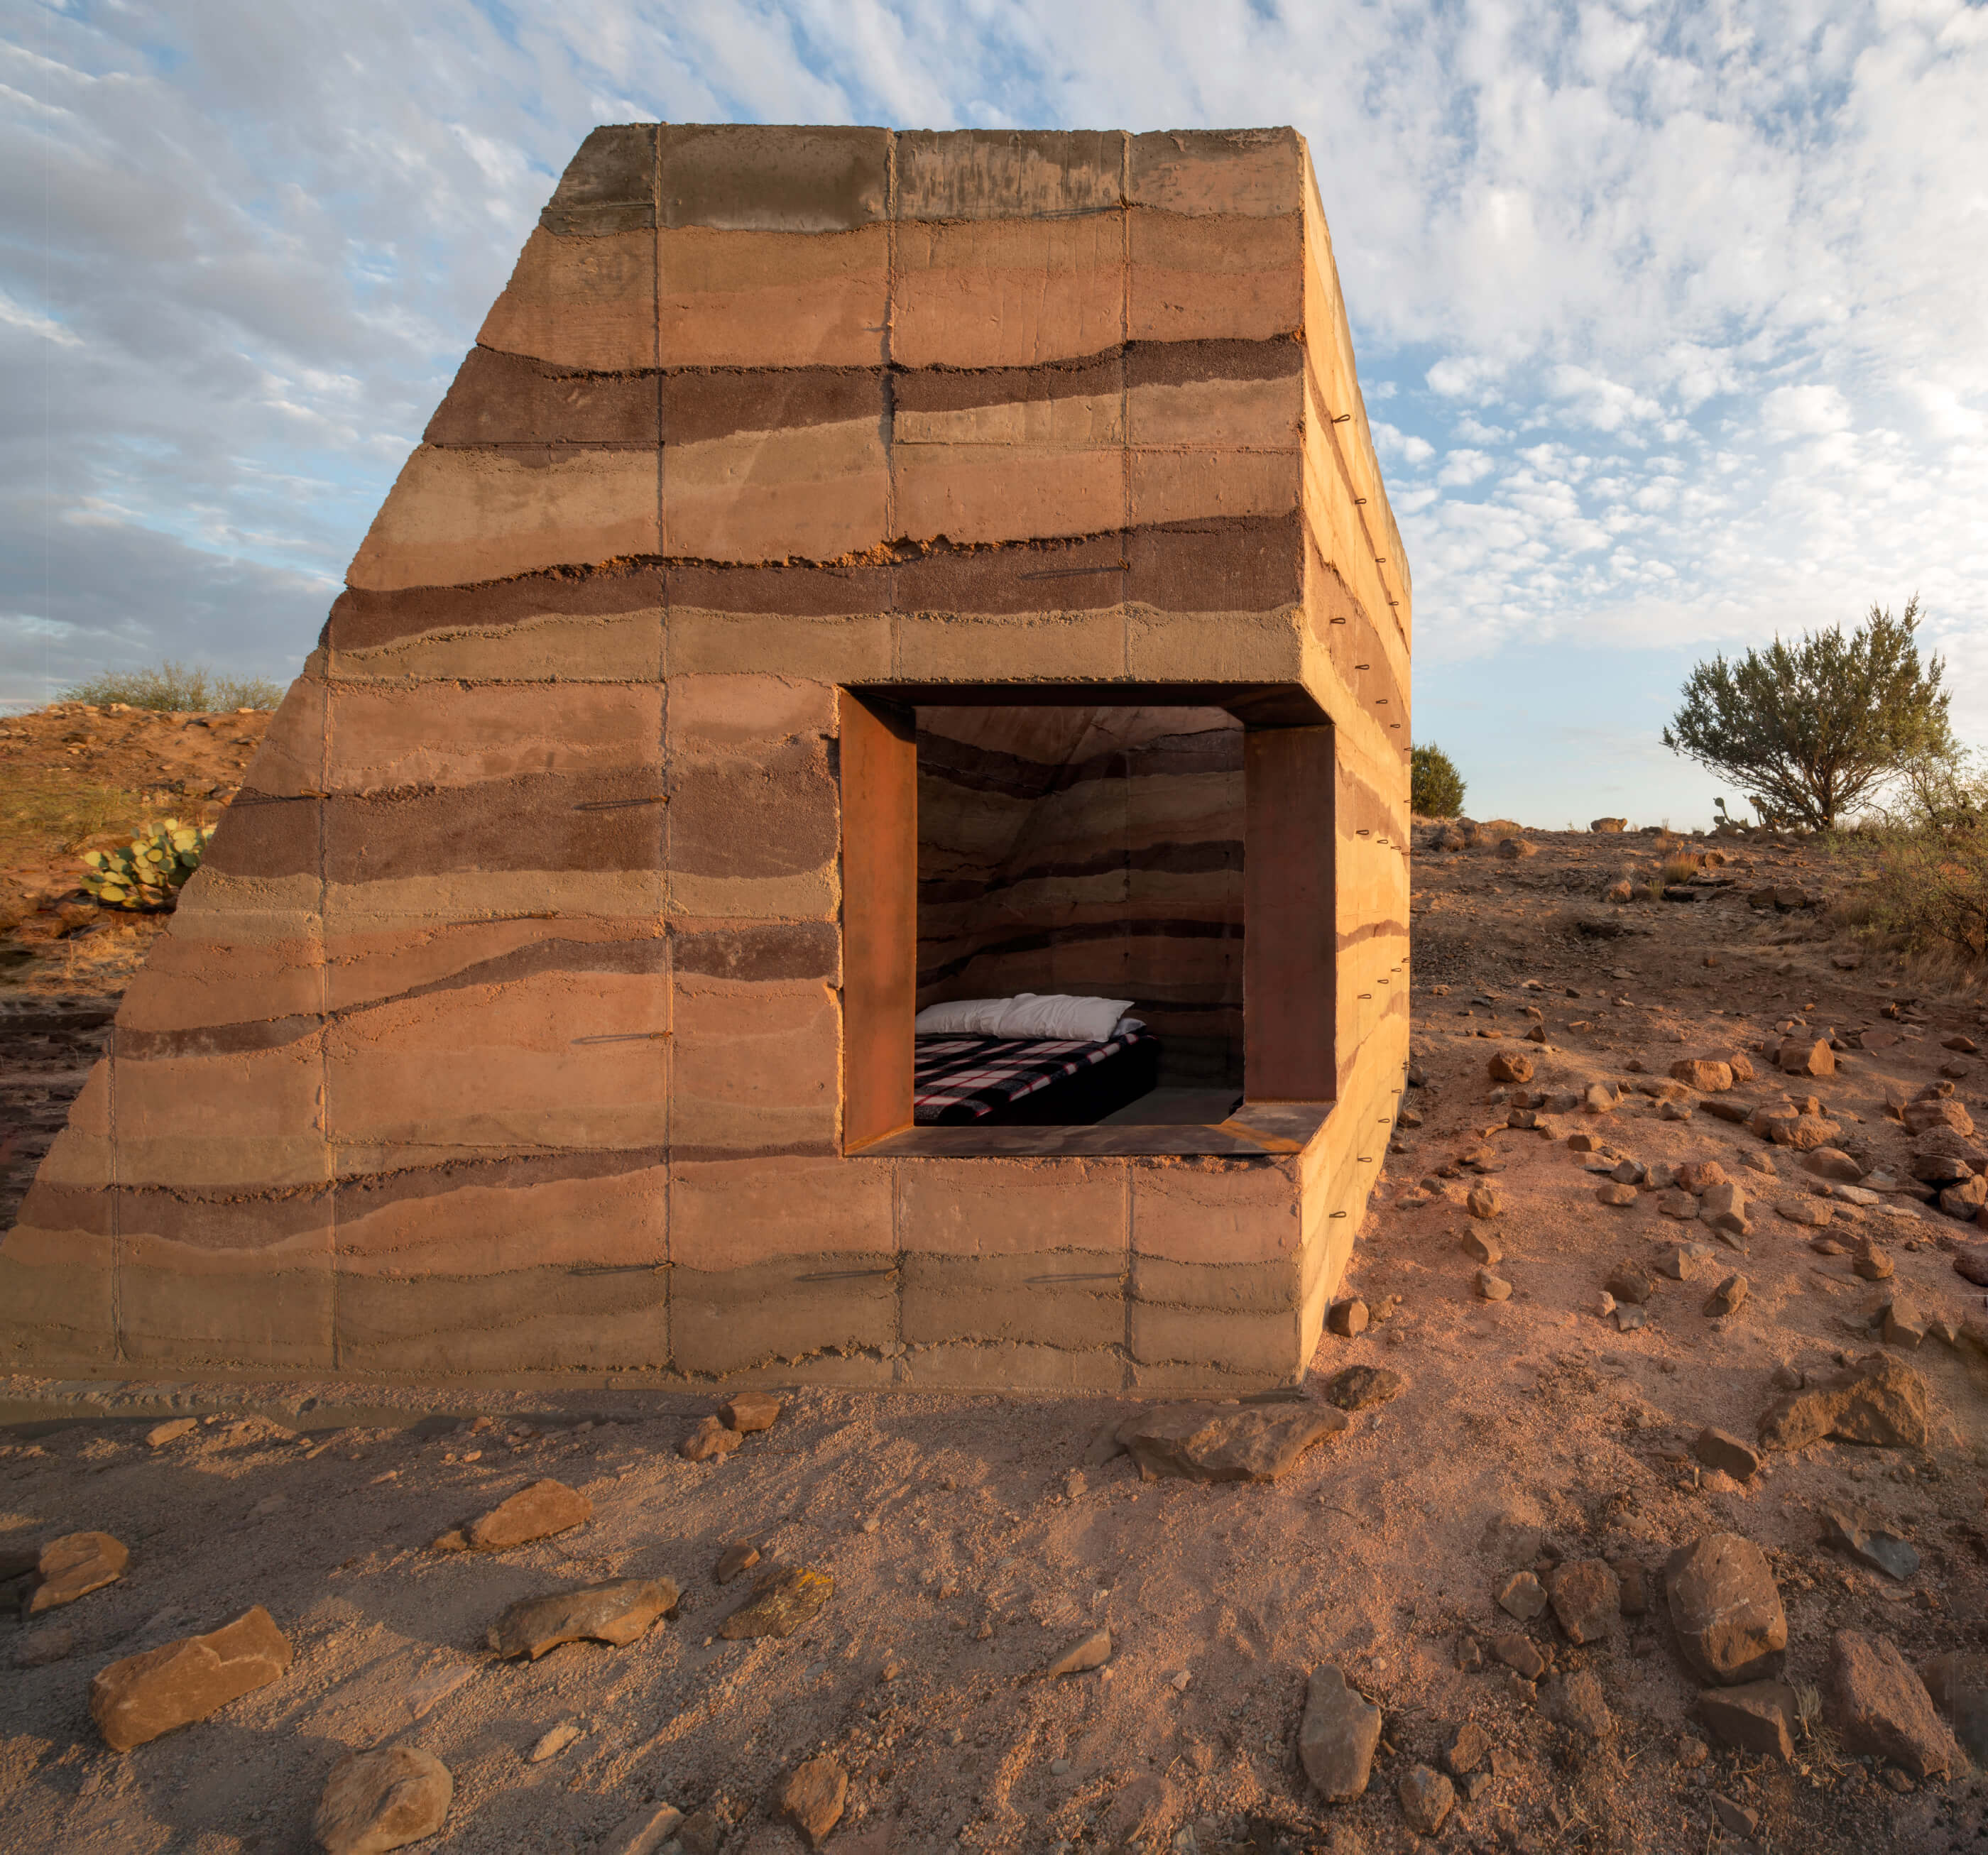 A rammed earth shelter